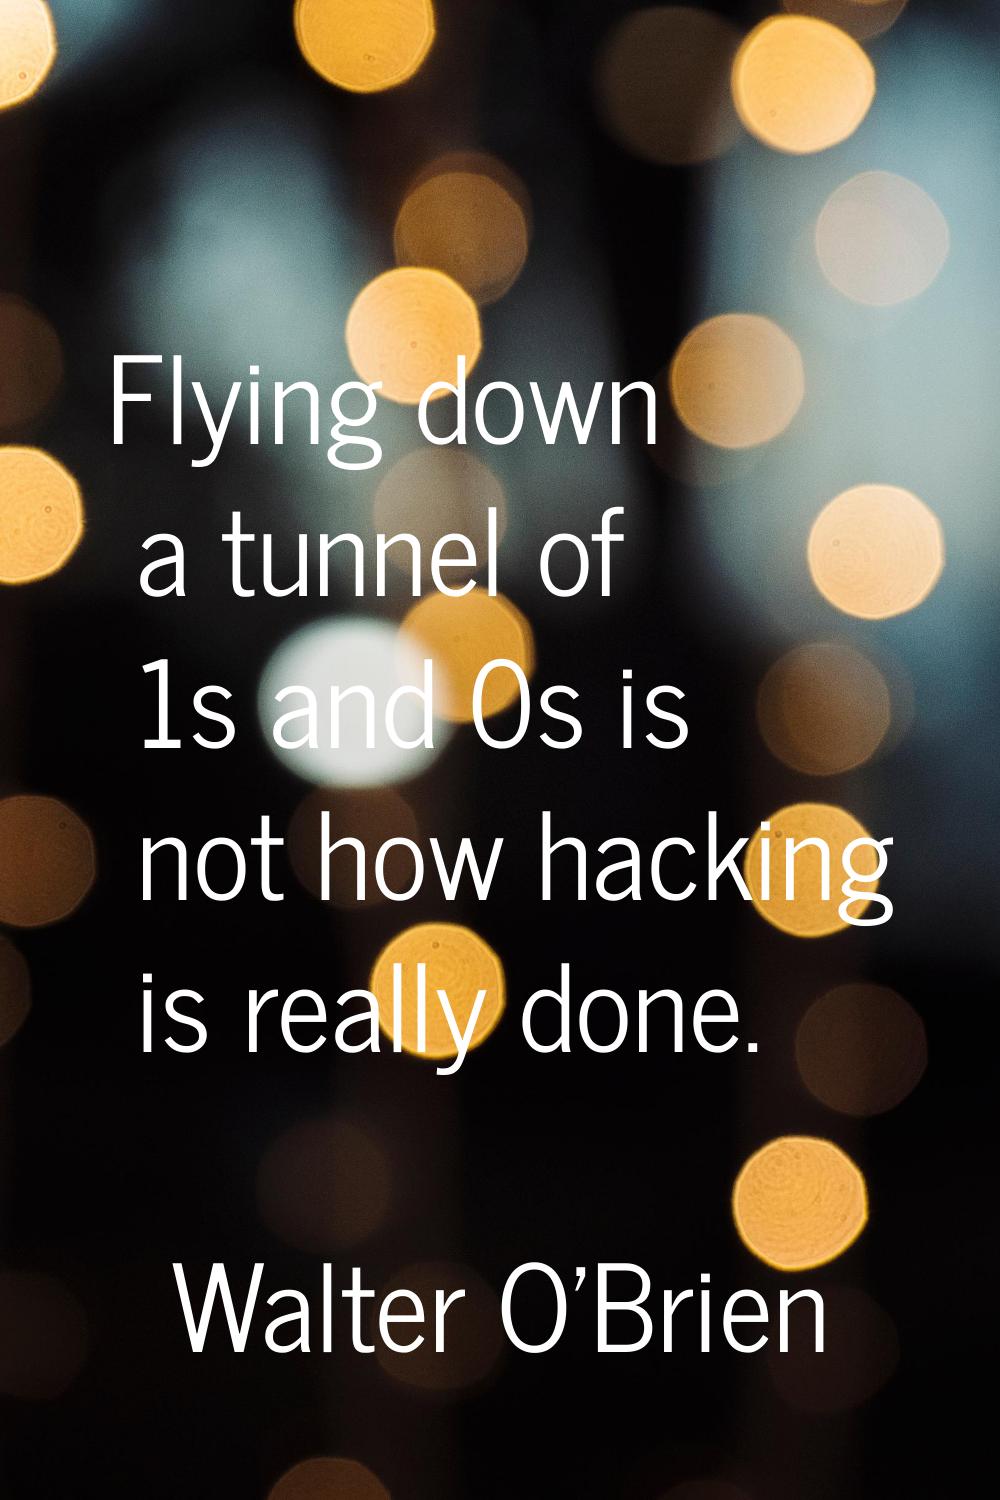 Flying down a tunnel of 1s and 0s is not how hacking is really done.